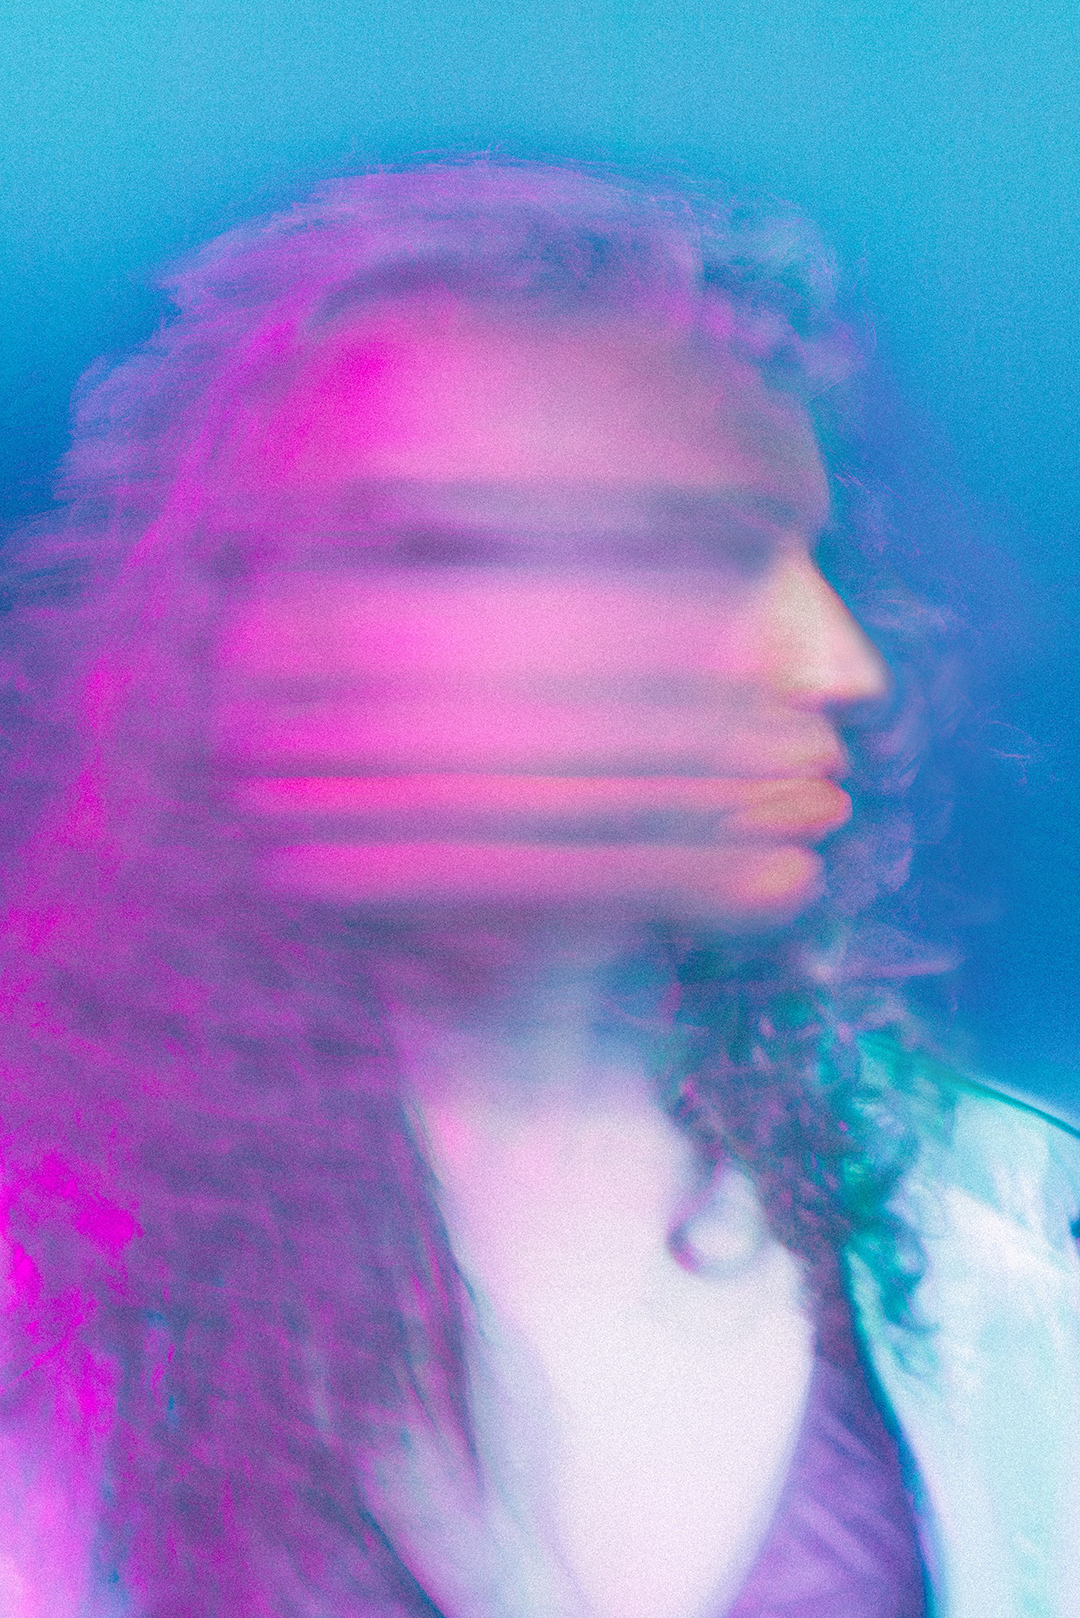 Woman's face blurred with colors